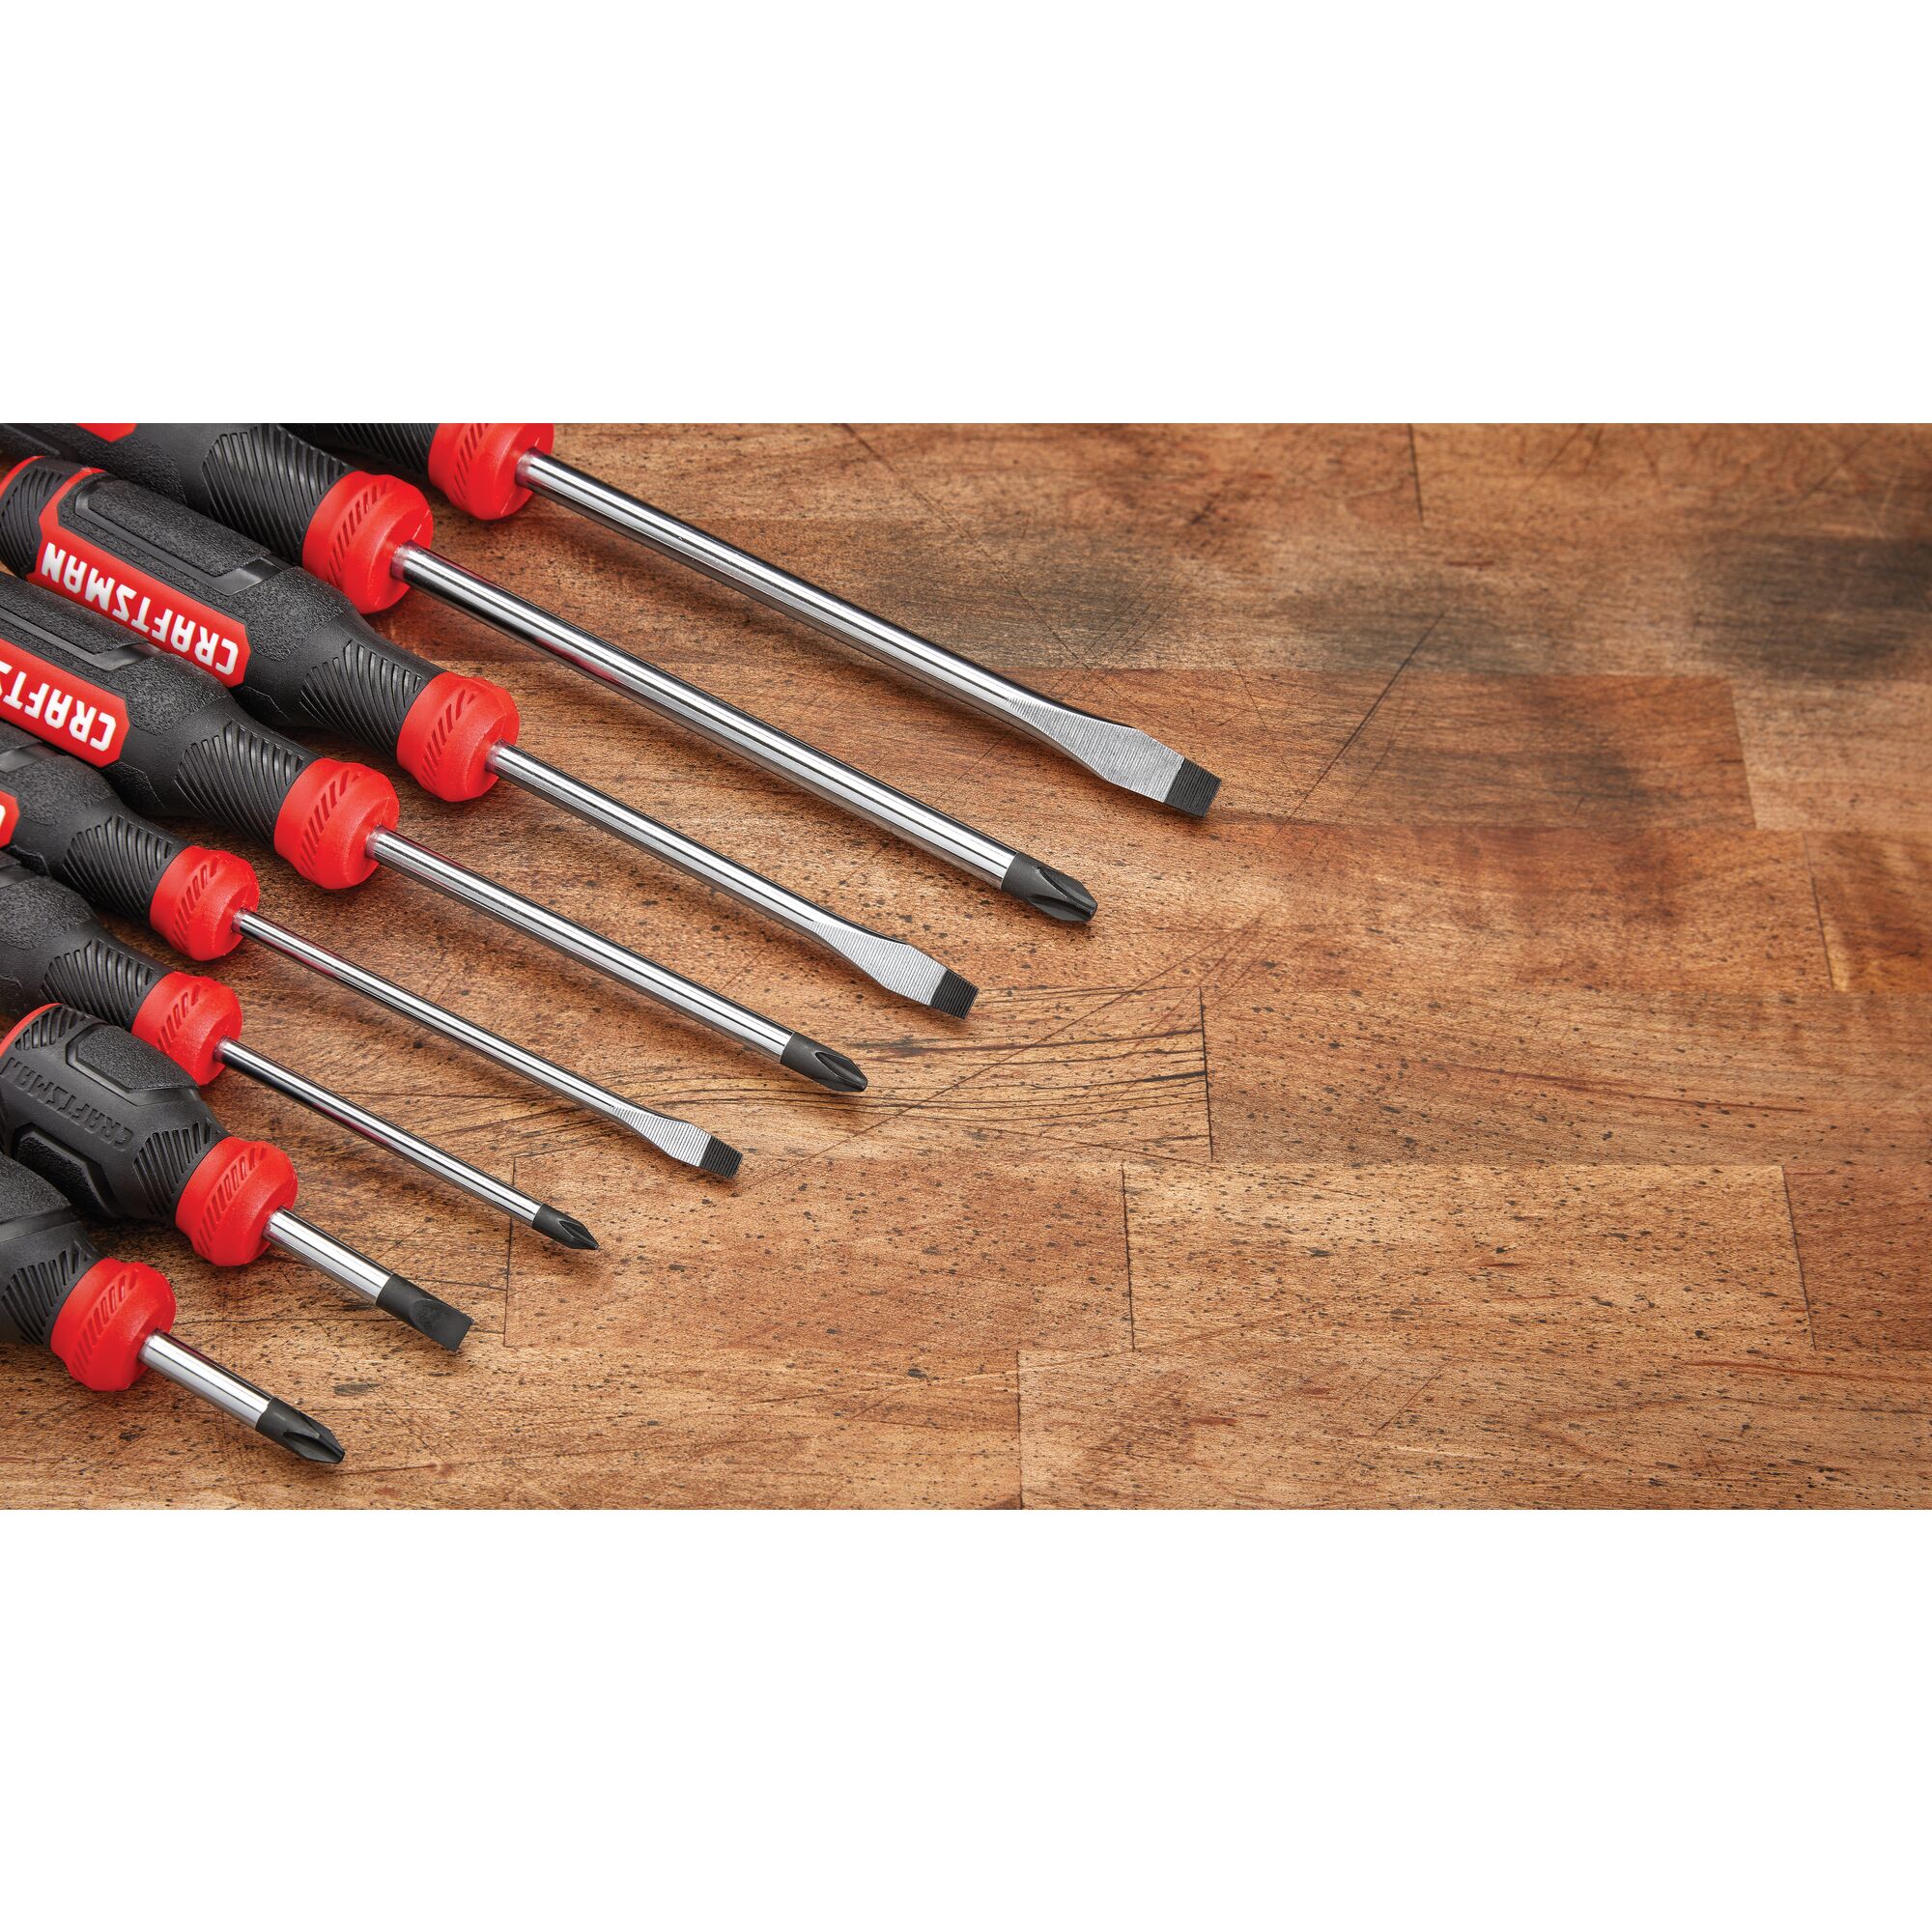 View of CRAFTSMAN Screwdrivers: Bi-Material highlighting product features